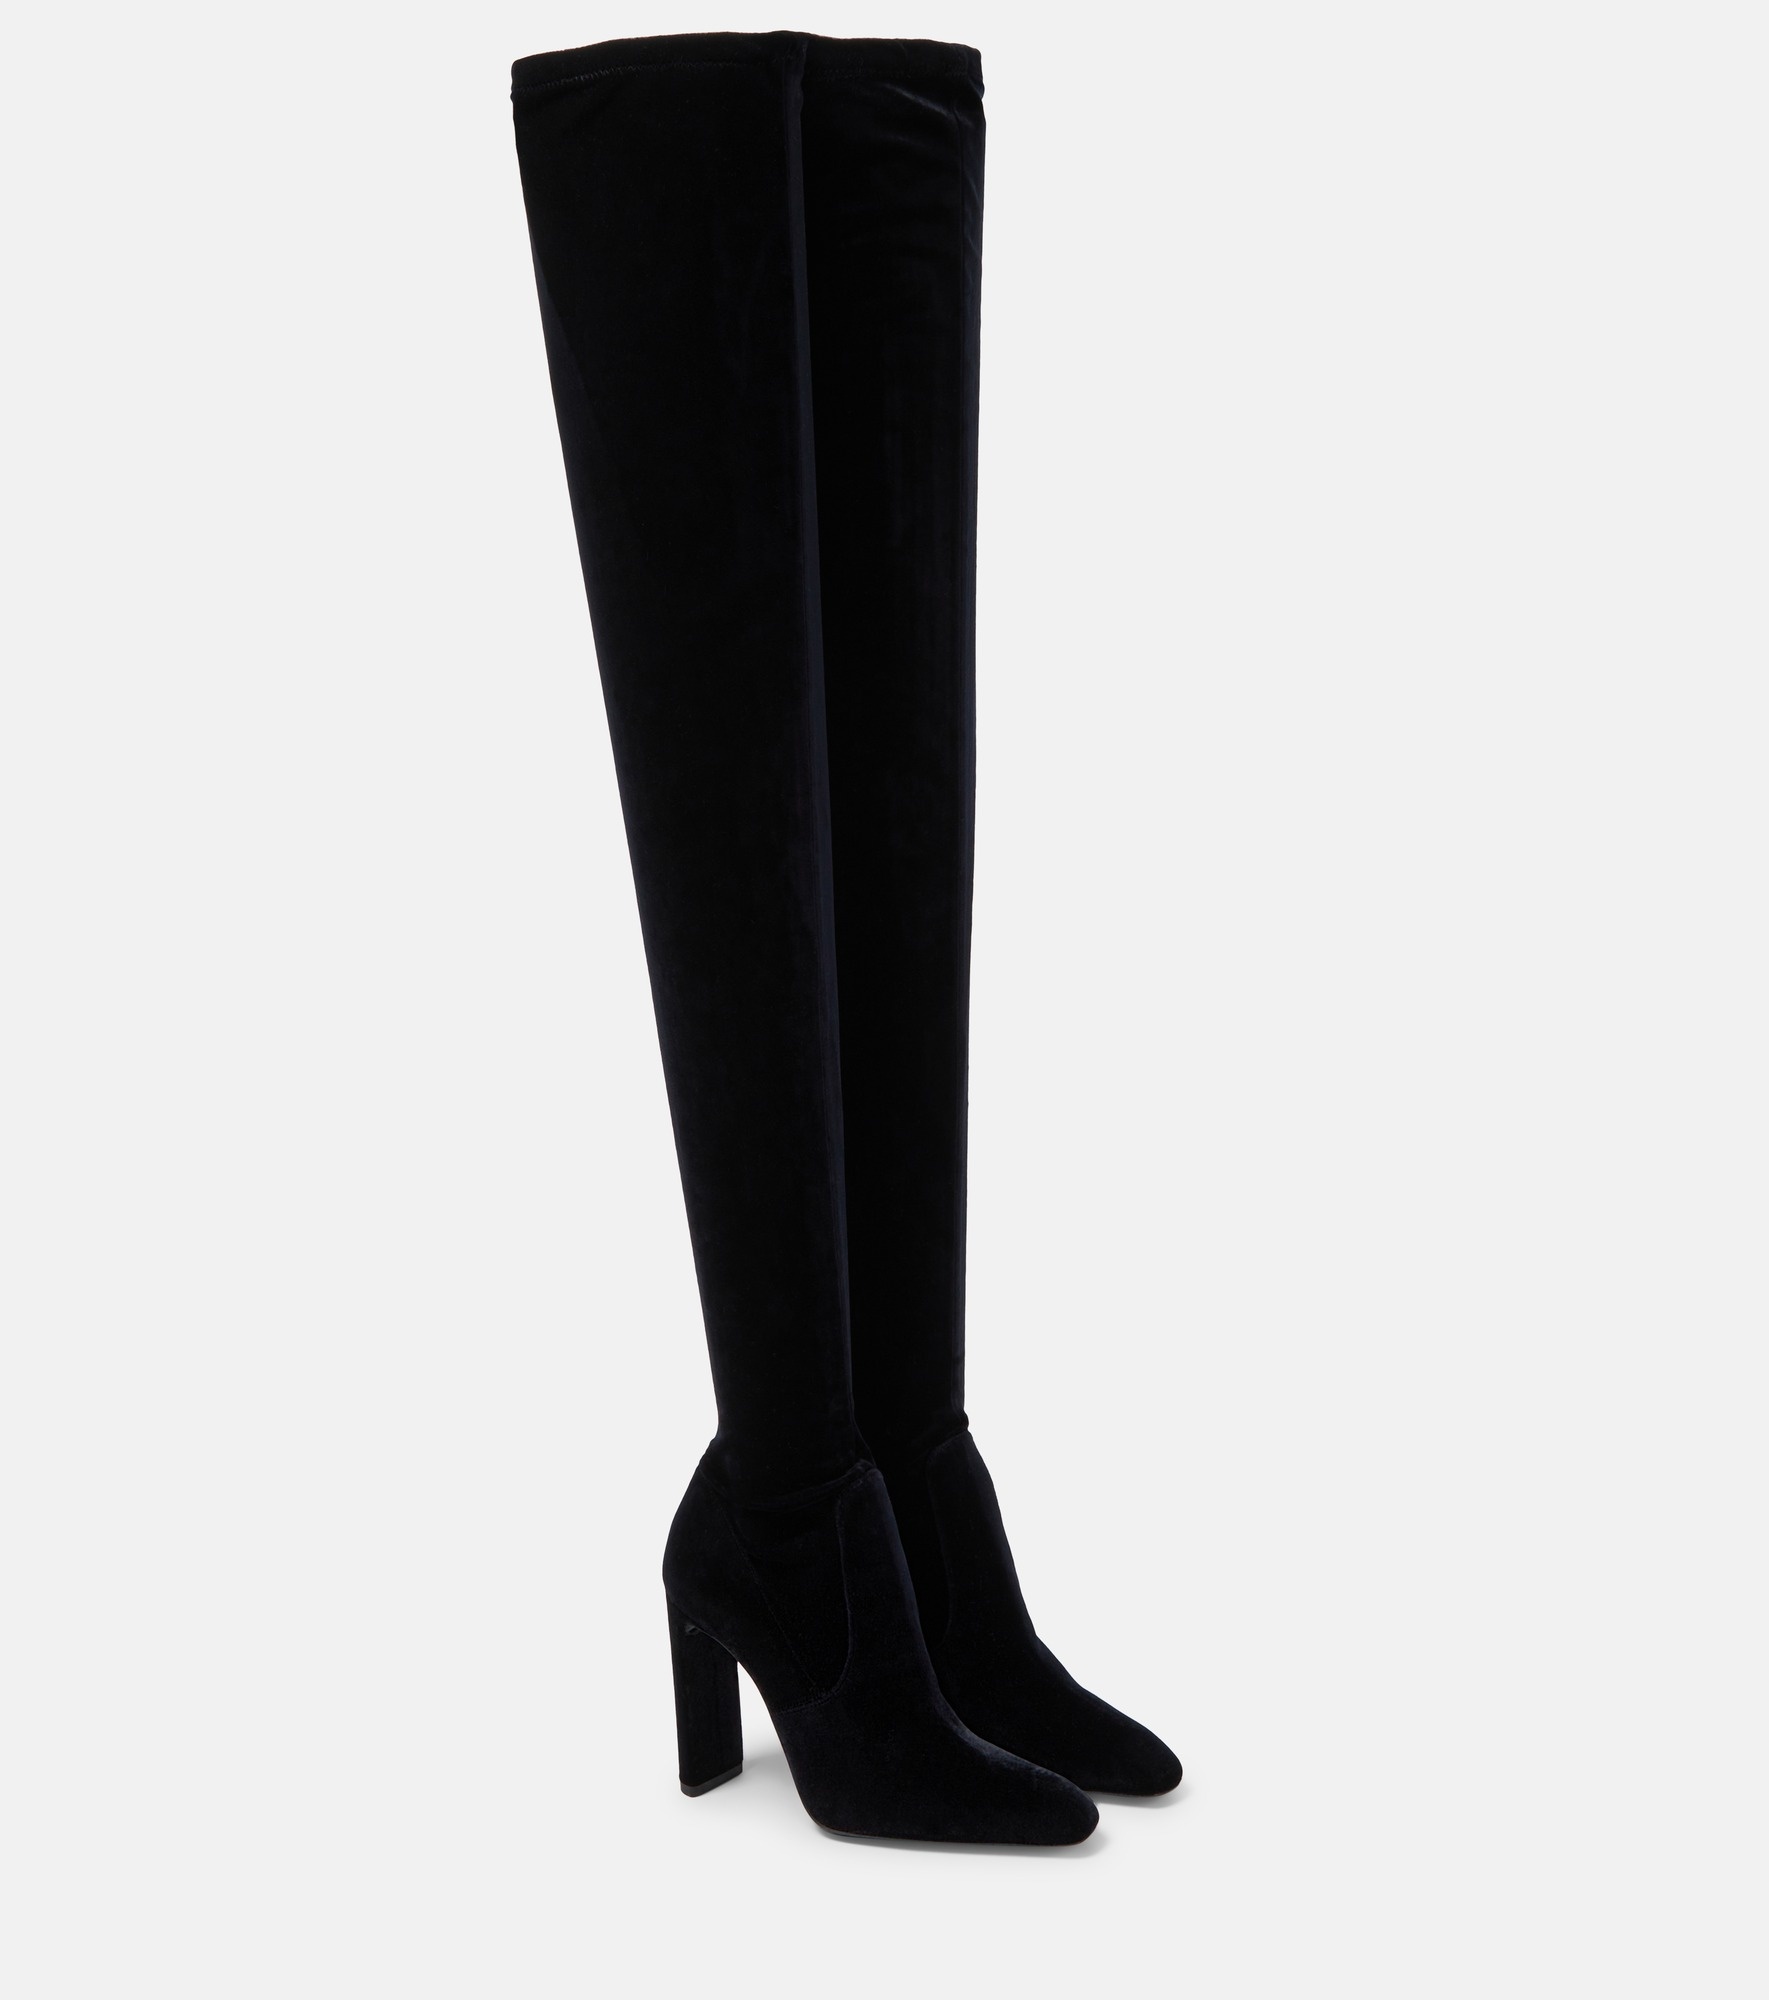 Auteuil 105 velvet over-the-knee boots - 1